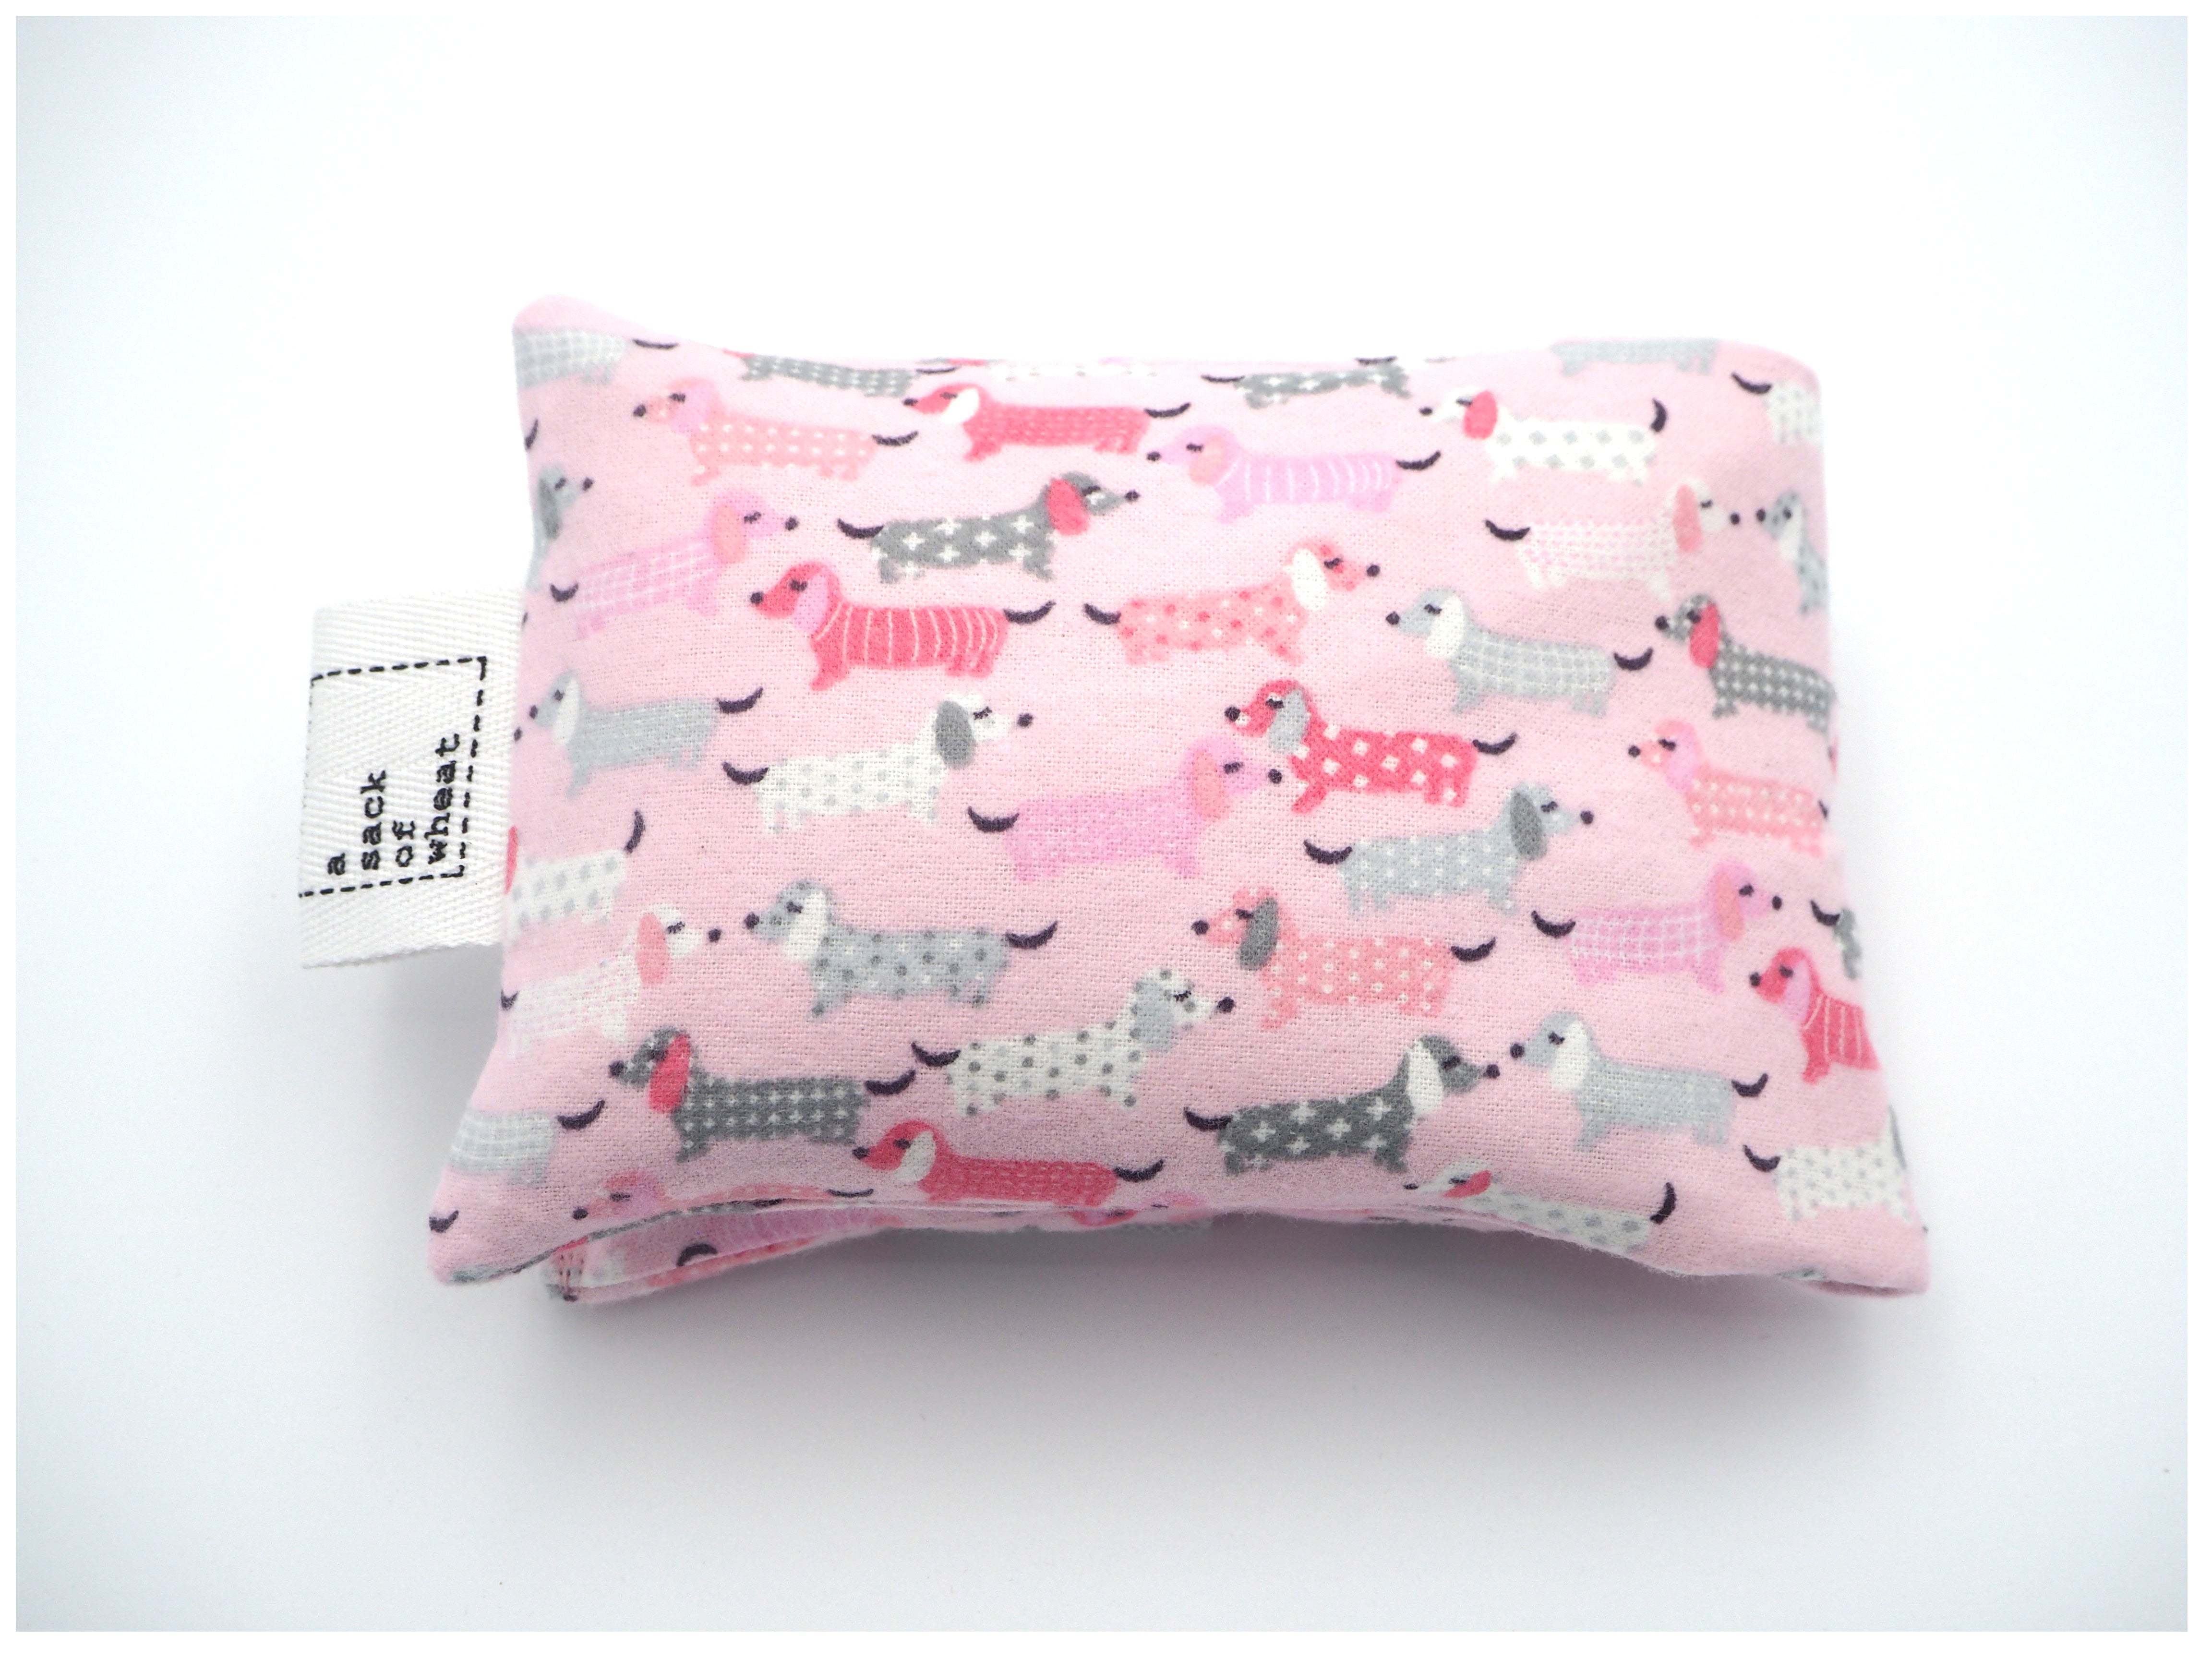 Folded view of A Sack Of Wheat, featuring pink, fluffy Dash Hounds on soft flannelette, 100% cotton fabric